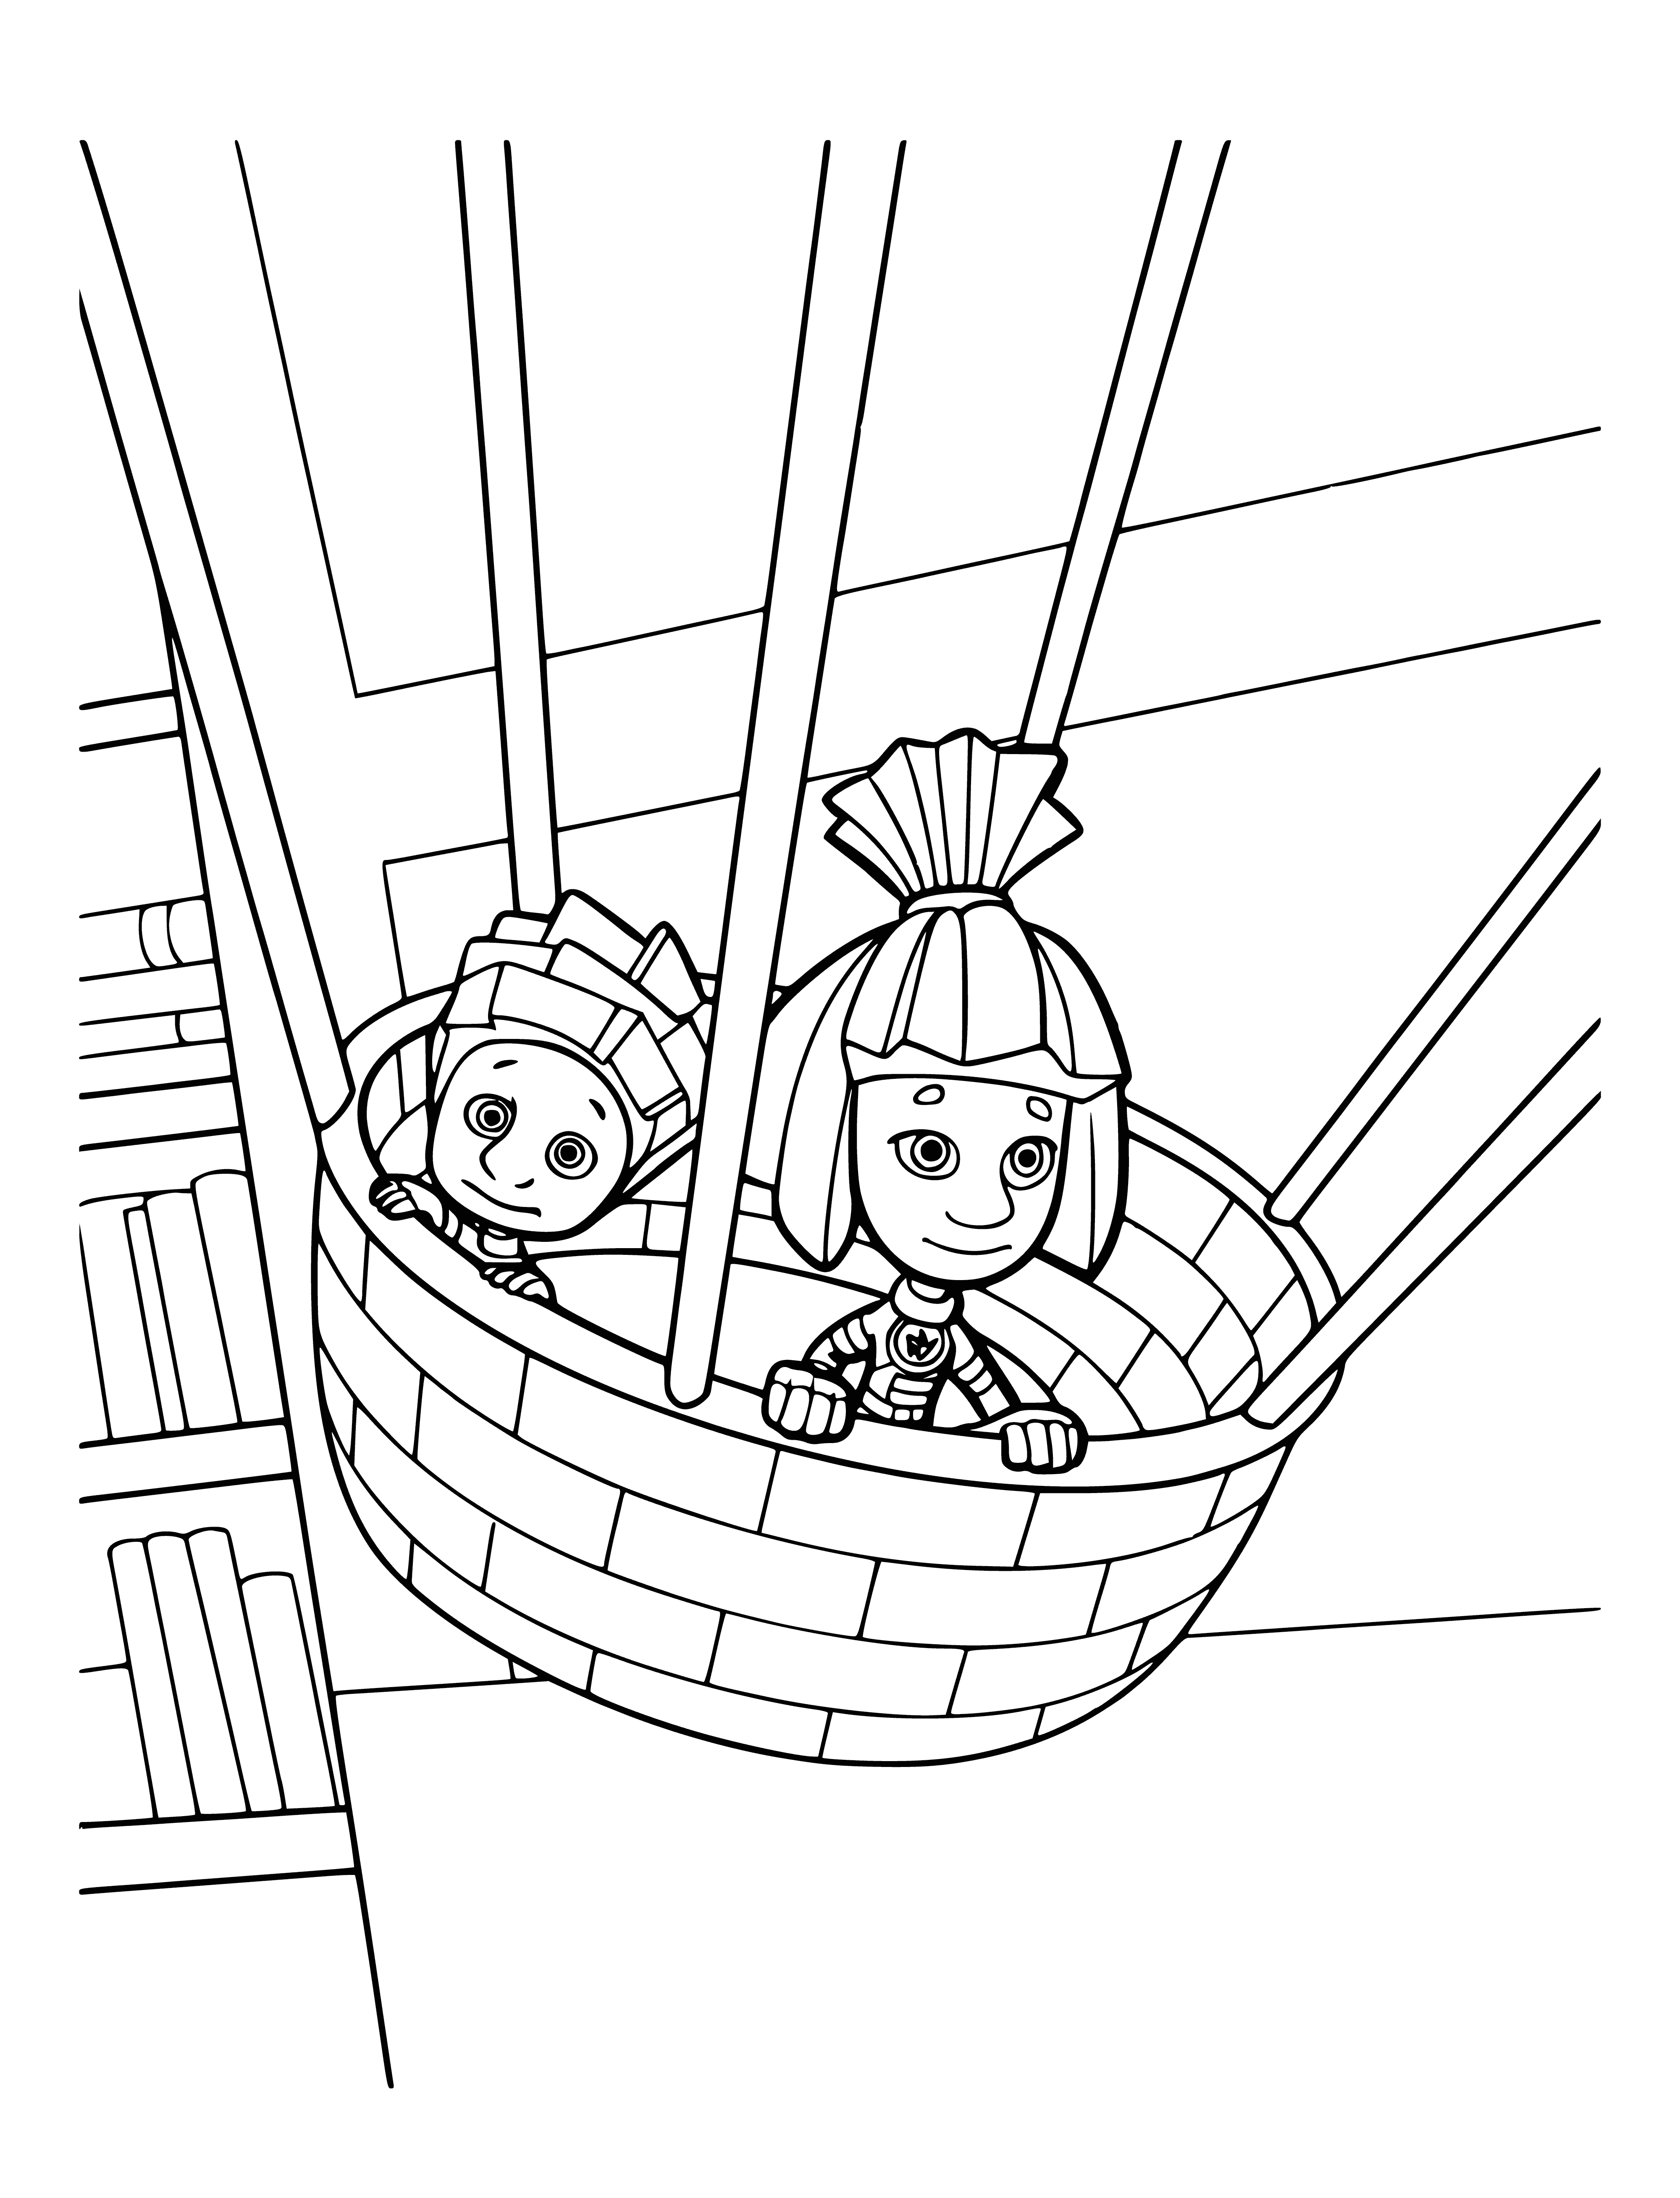 coloring page: Two Fixies, Nolik & Simka, in overalls & caps stand on a ladder, one with wrench & one with screwdriver, next to a lightbulb.